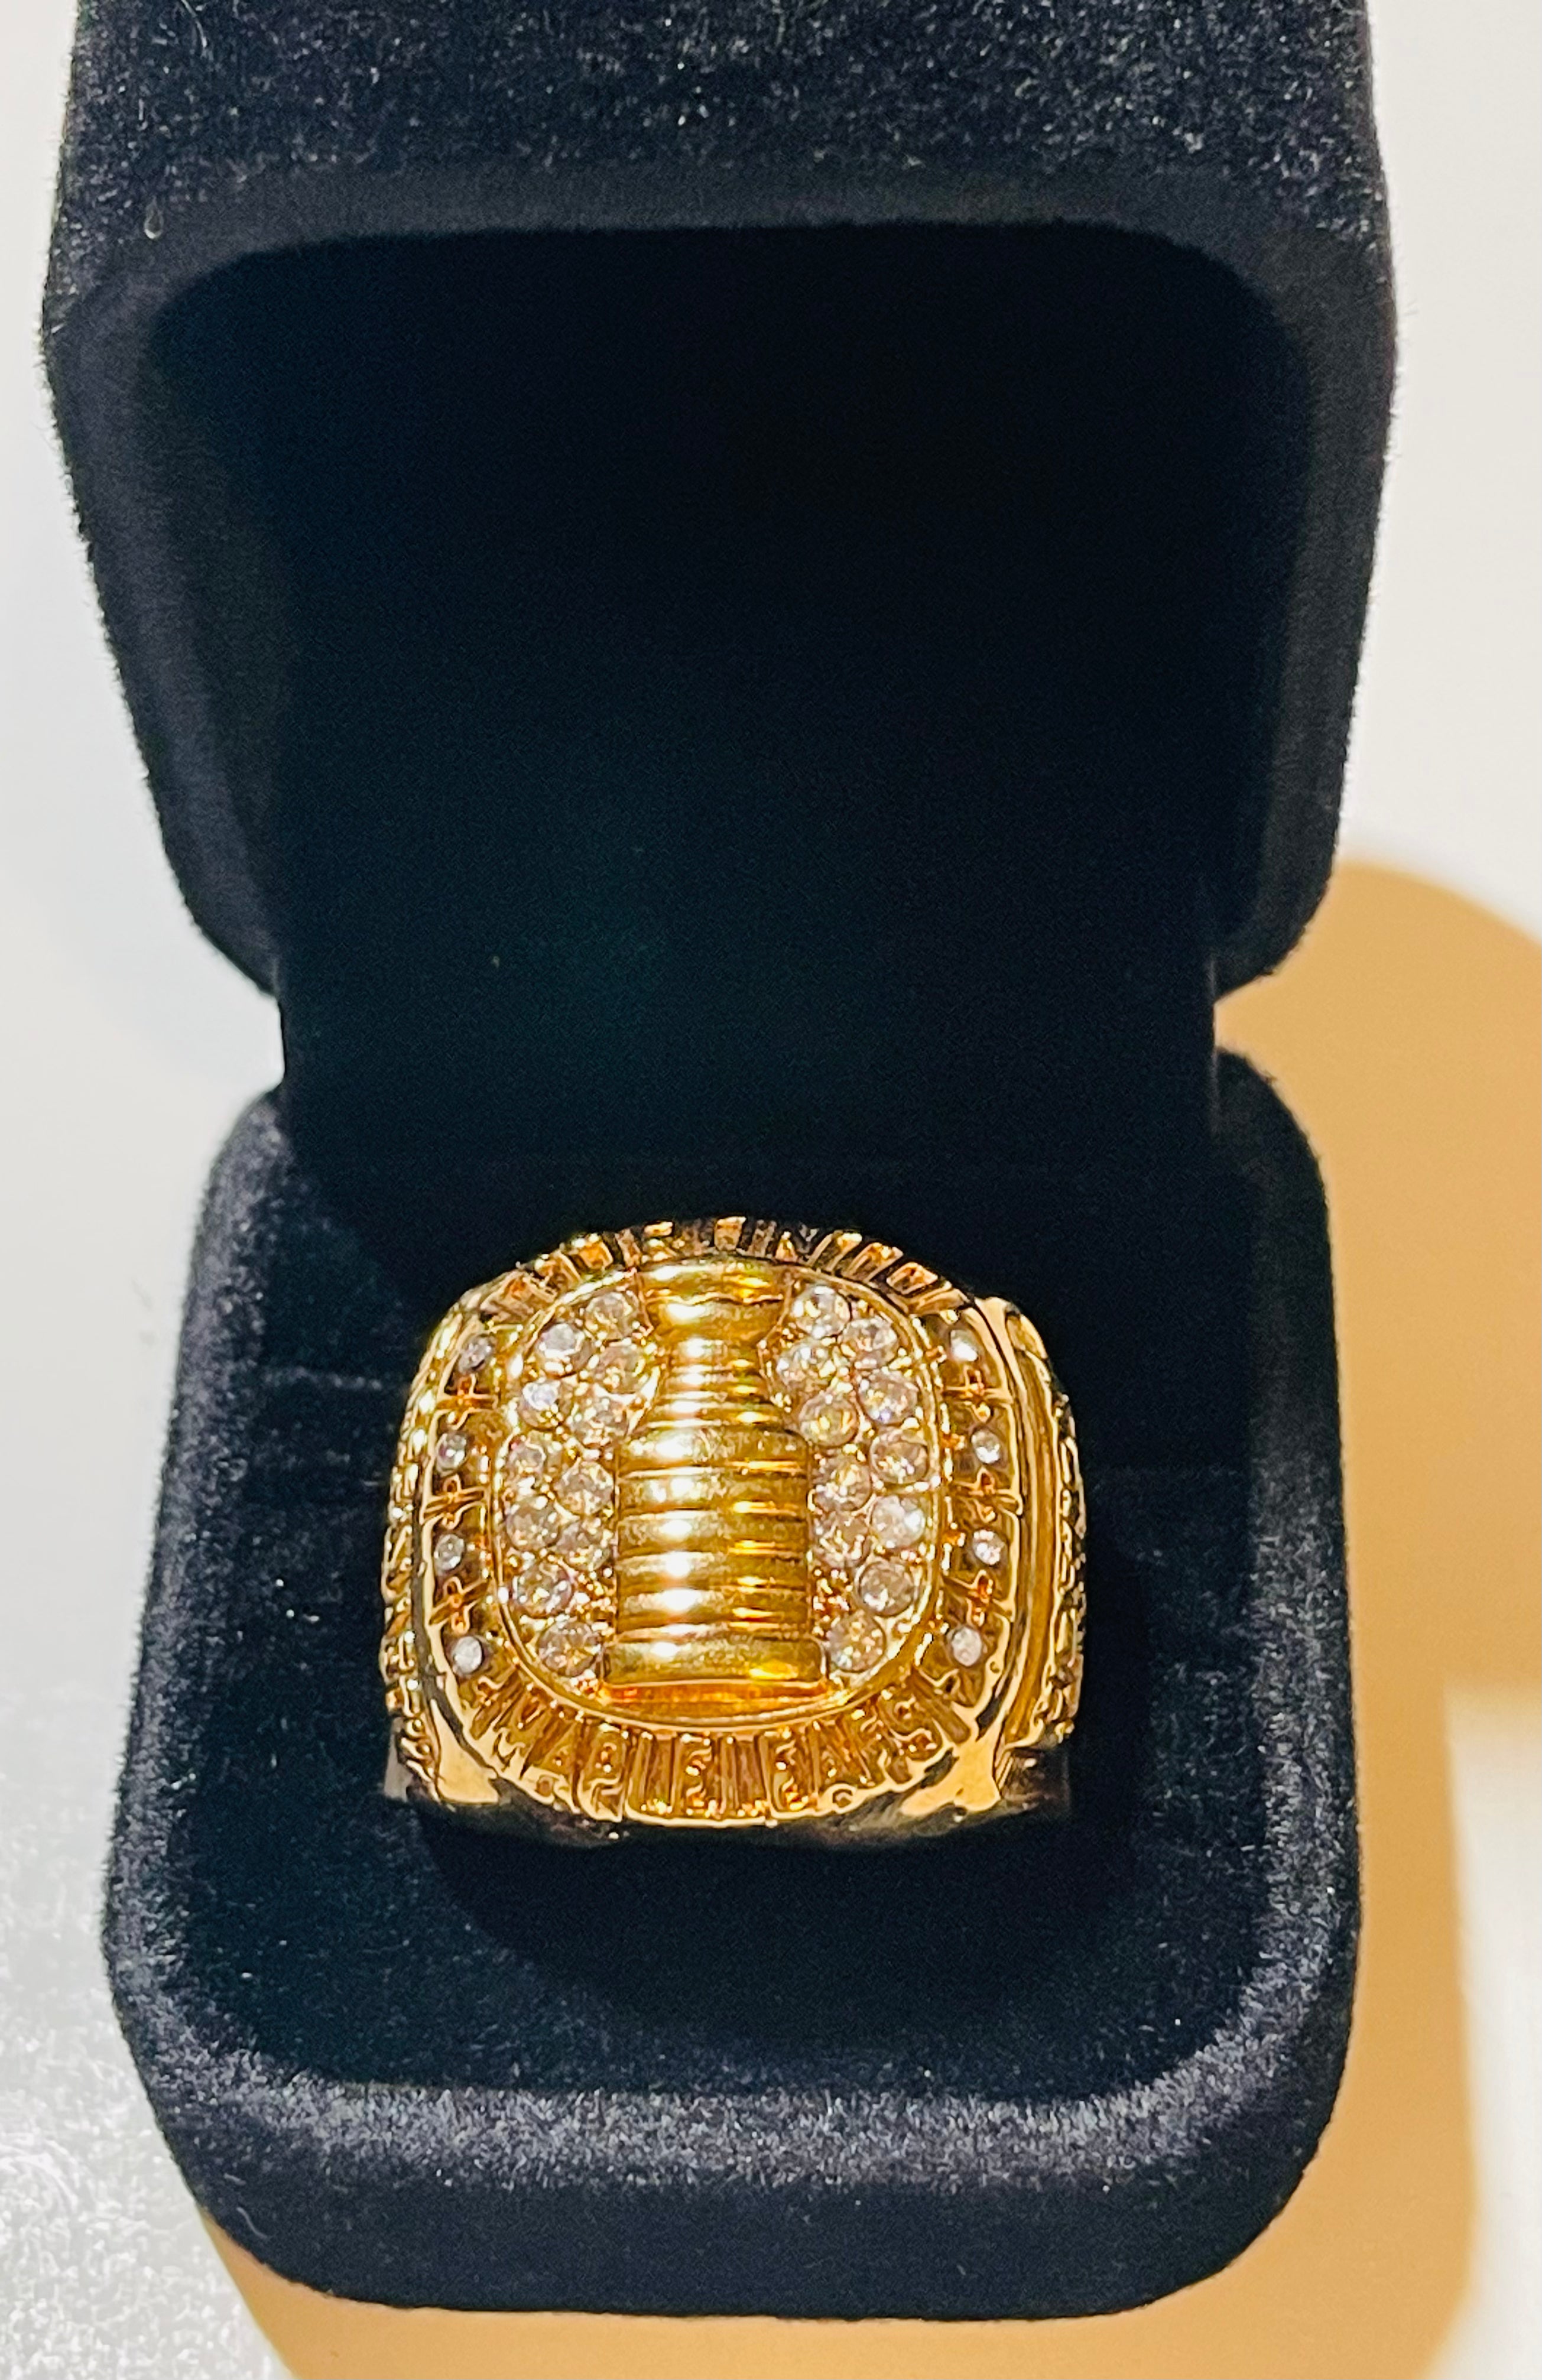 Toronto Maple Leafs hockey Stanley Cup replica Ring